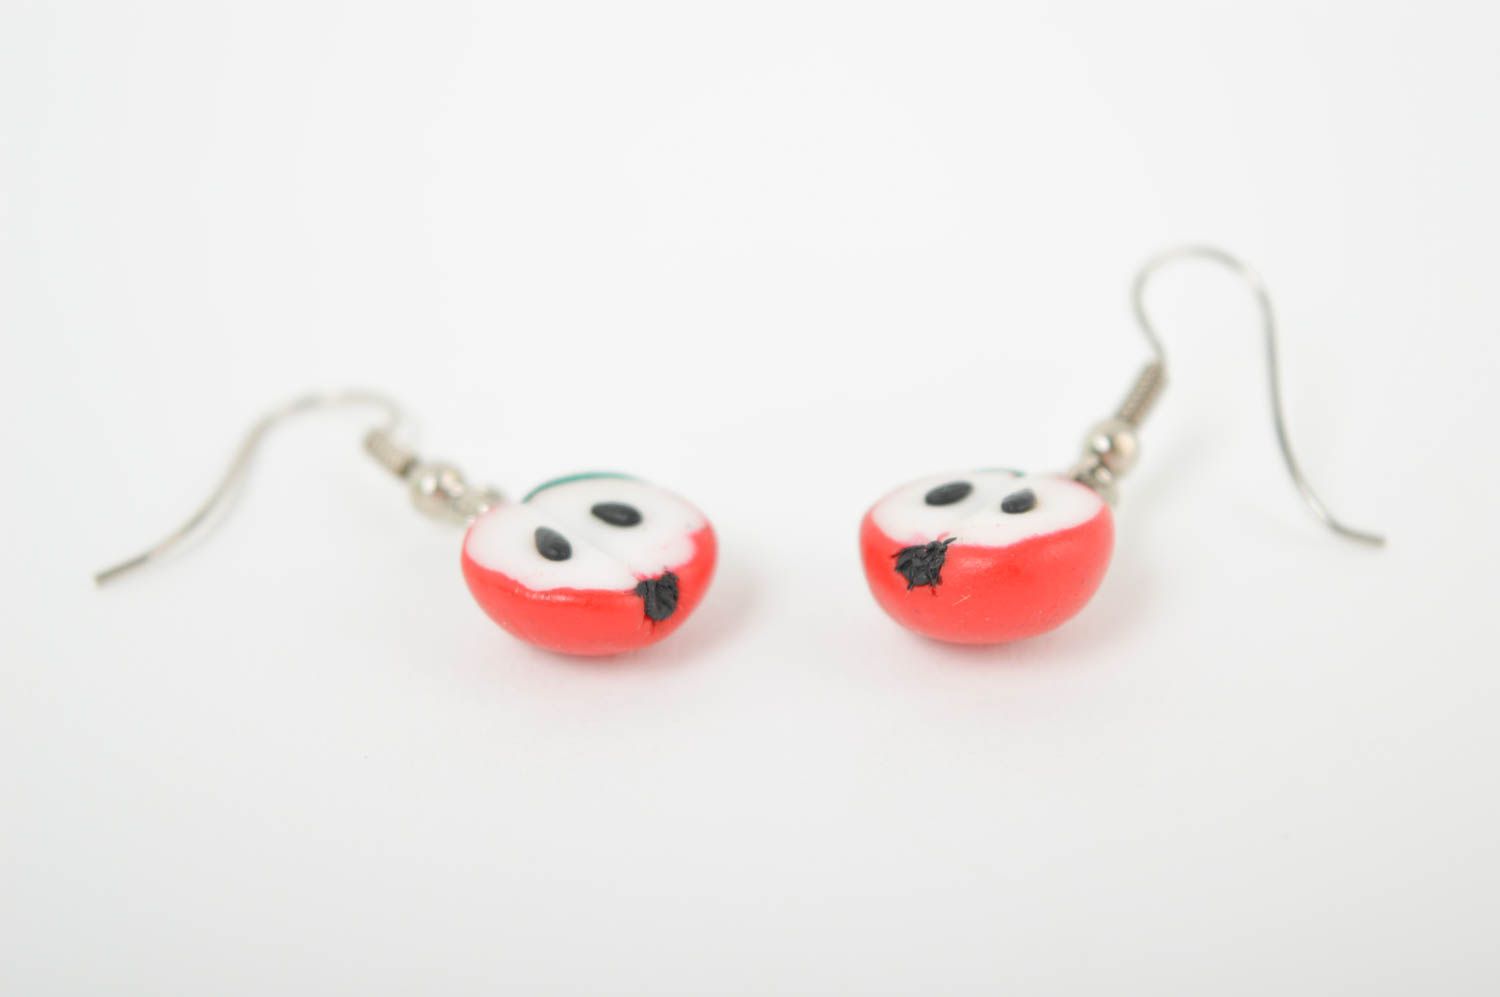 Stylish handmade plastic earrings polymer clay ideas accessories for girls photo 5